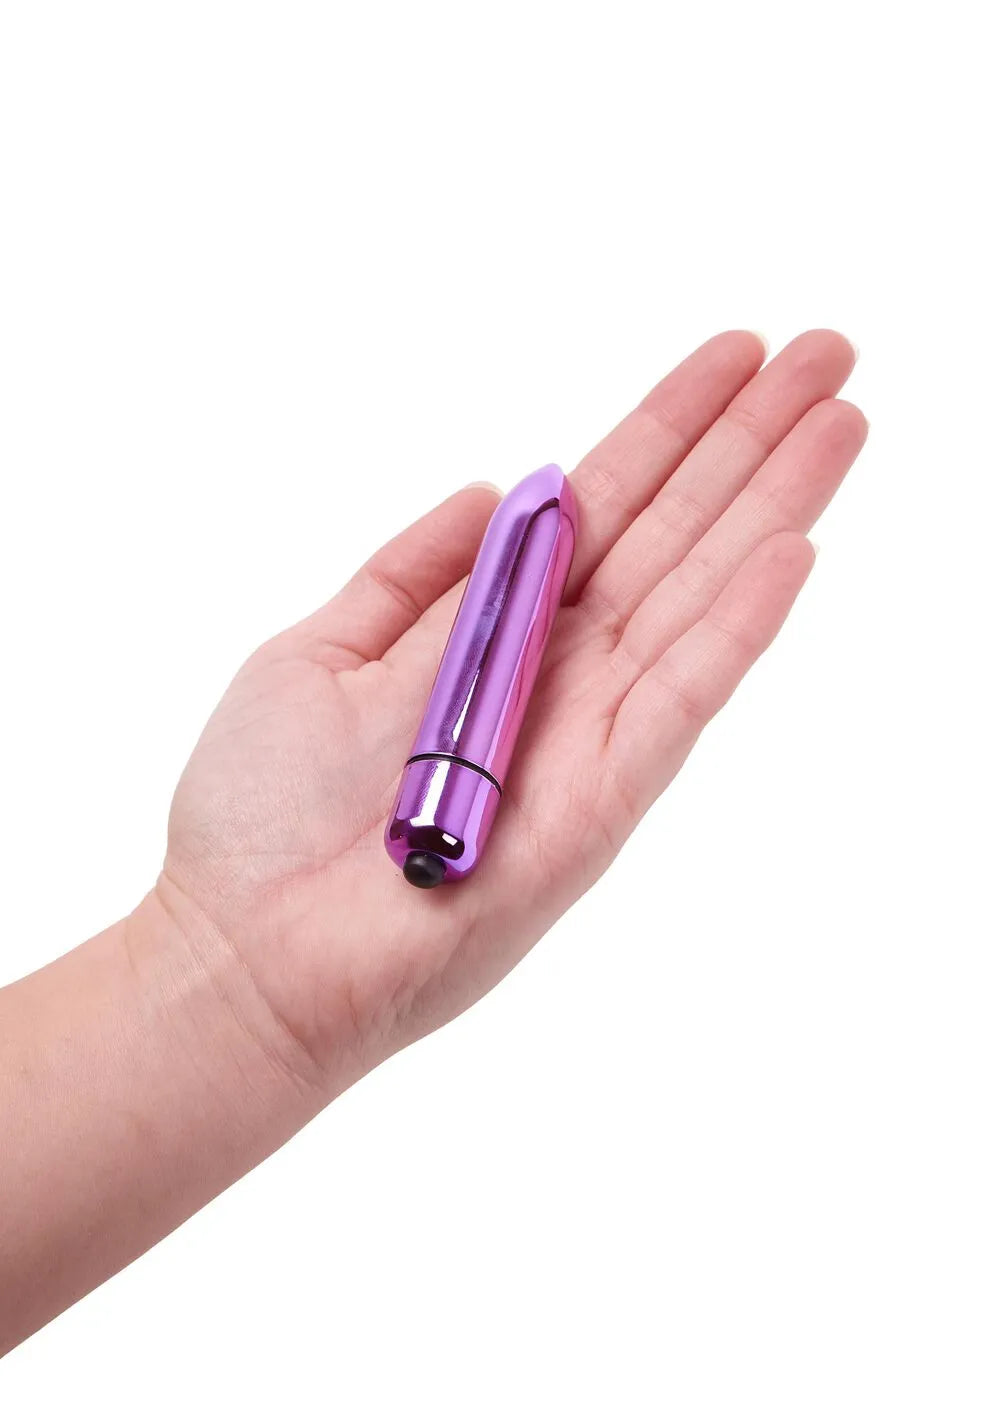 3 Speed Bullet Vibrator Purple From Ann Summers, Image 1